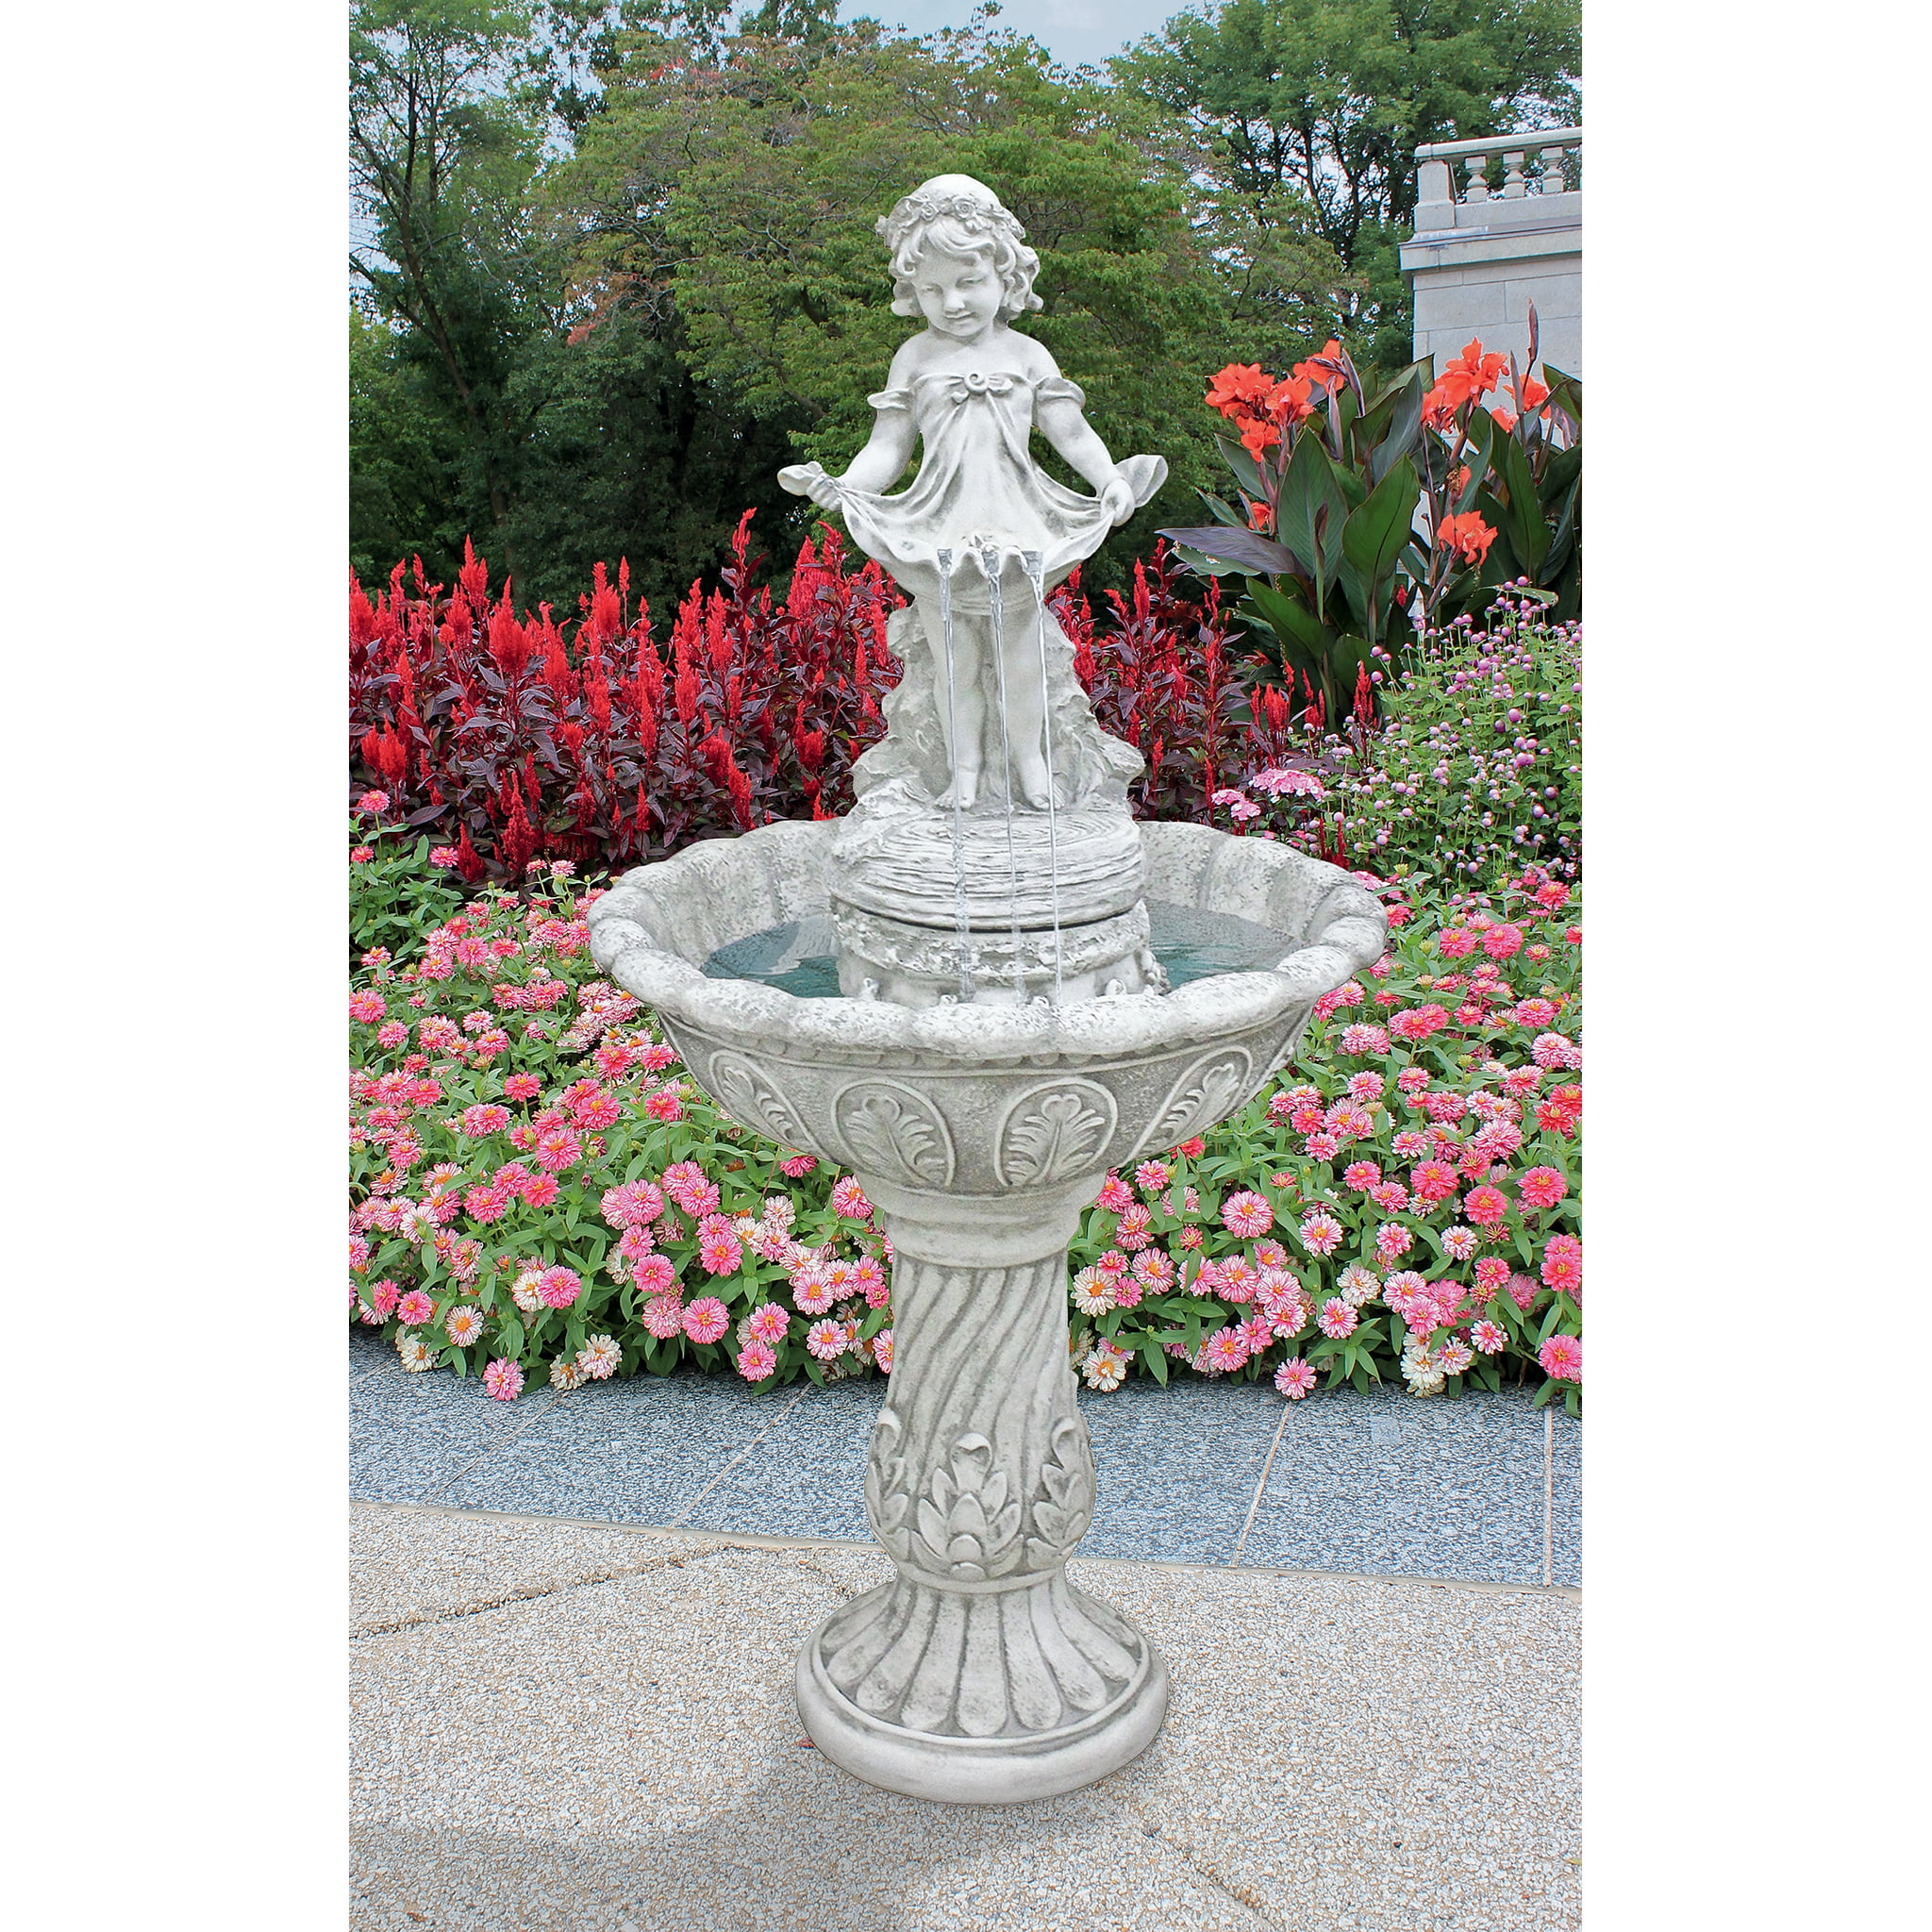 Details about   Outdoor Water Fountain With LED Lights Lighted Cherub Angel Fountain With 